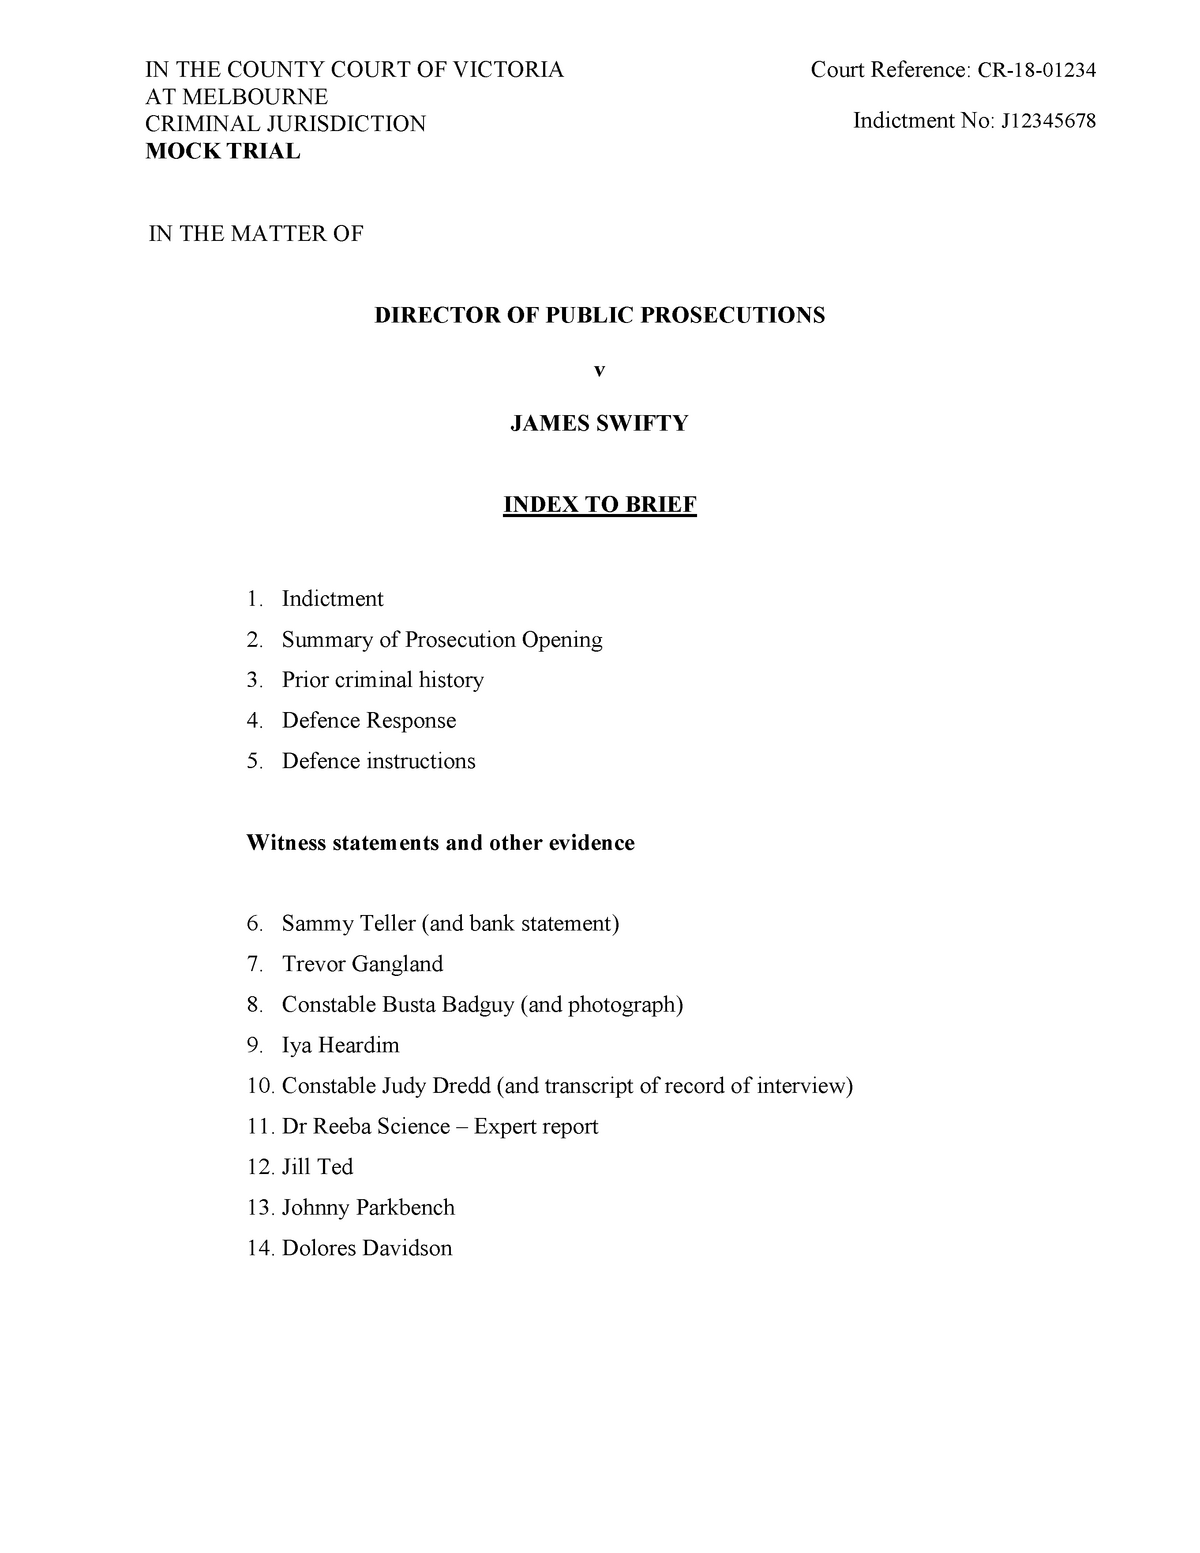 13 Mock Trial Brief - assignment - MLL13 - Evidence - Deakin